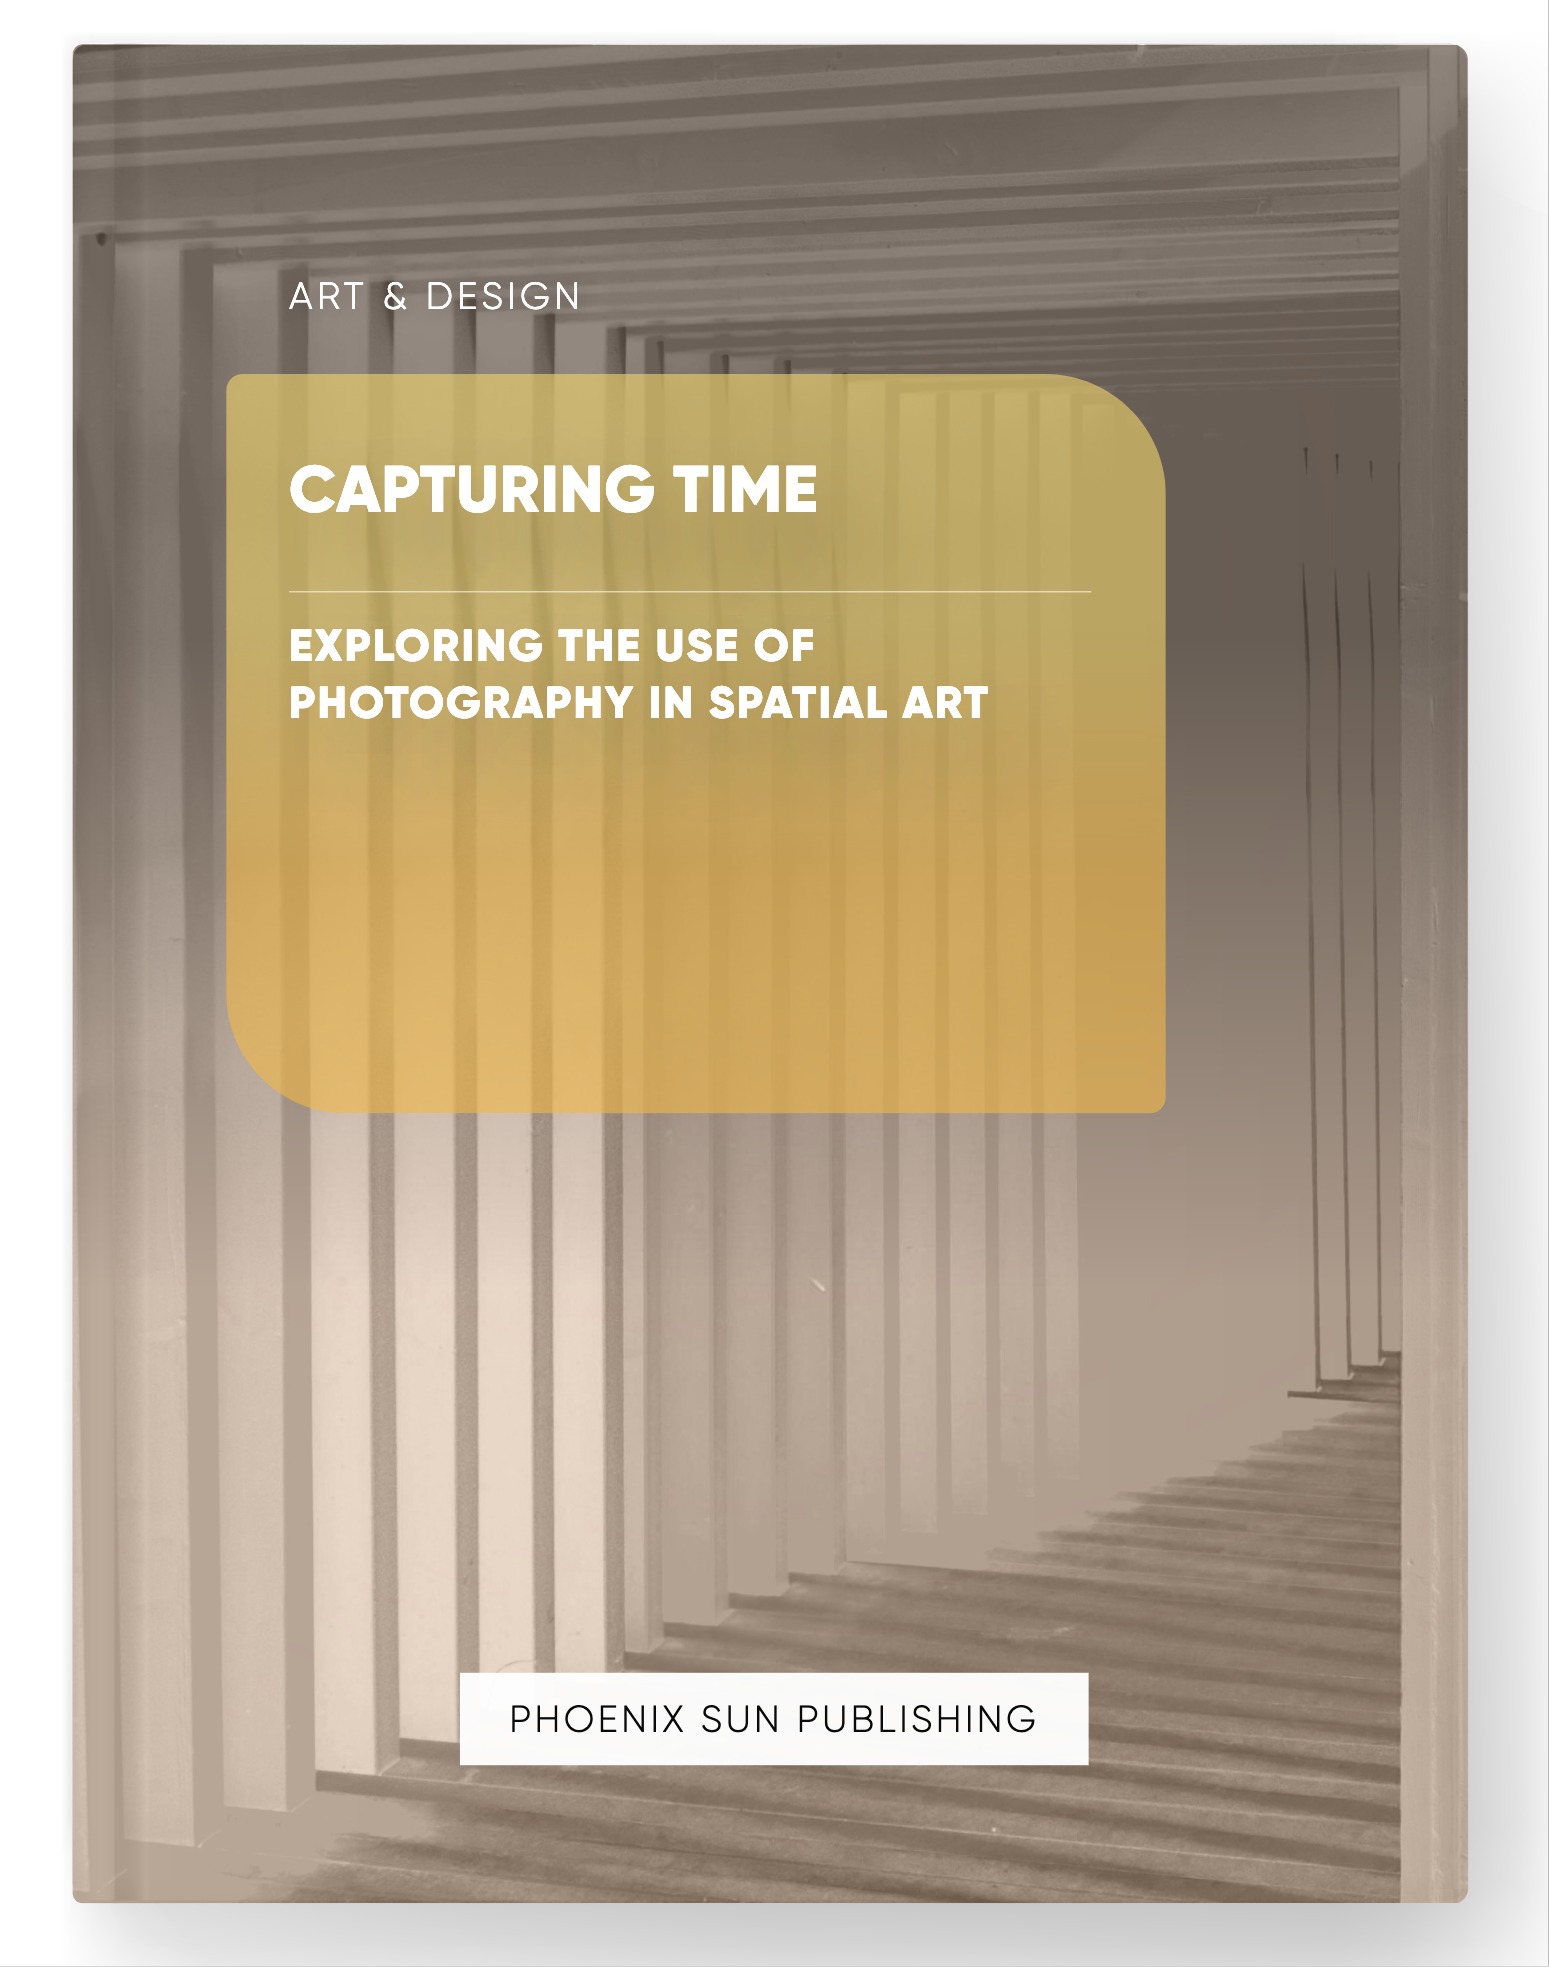 Capturing Time – Exploring the use of Photography in Spatial Art